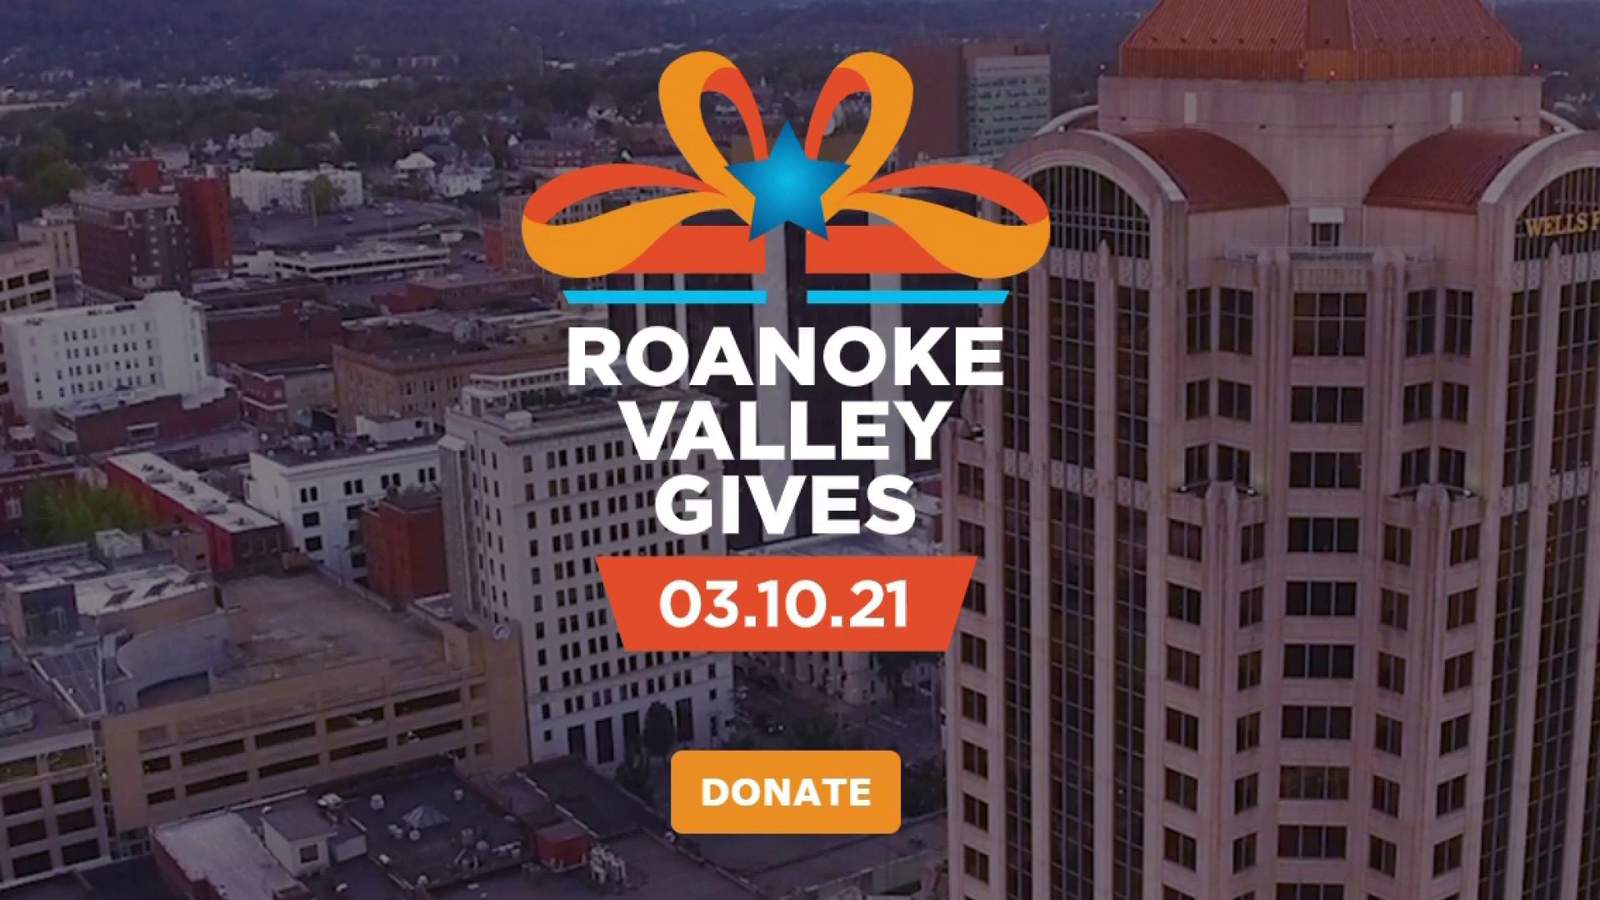 Nonprofits in need ask for support on Roanoke Valley’s biggest day of giving